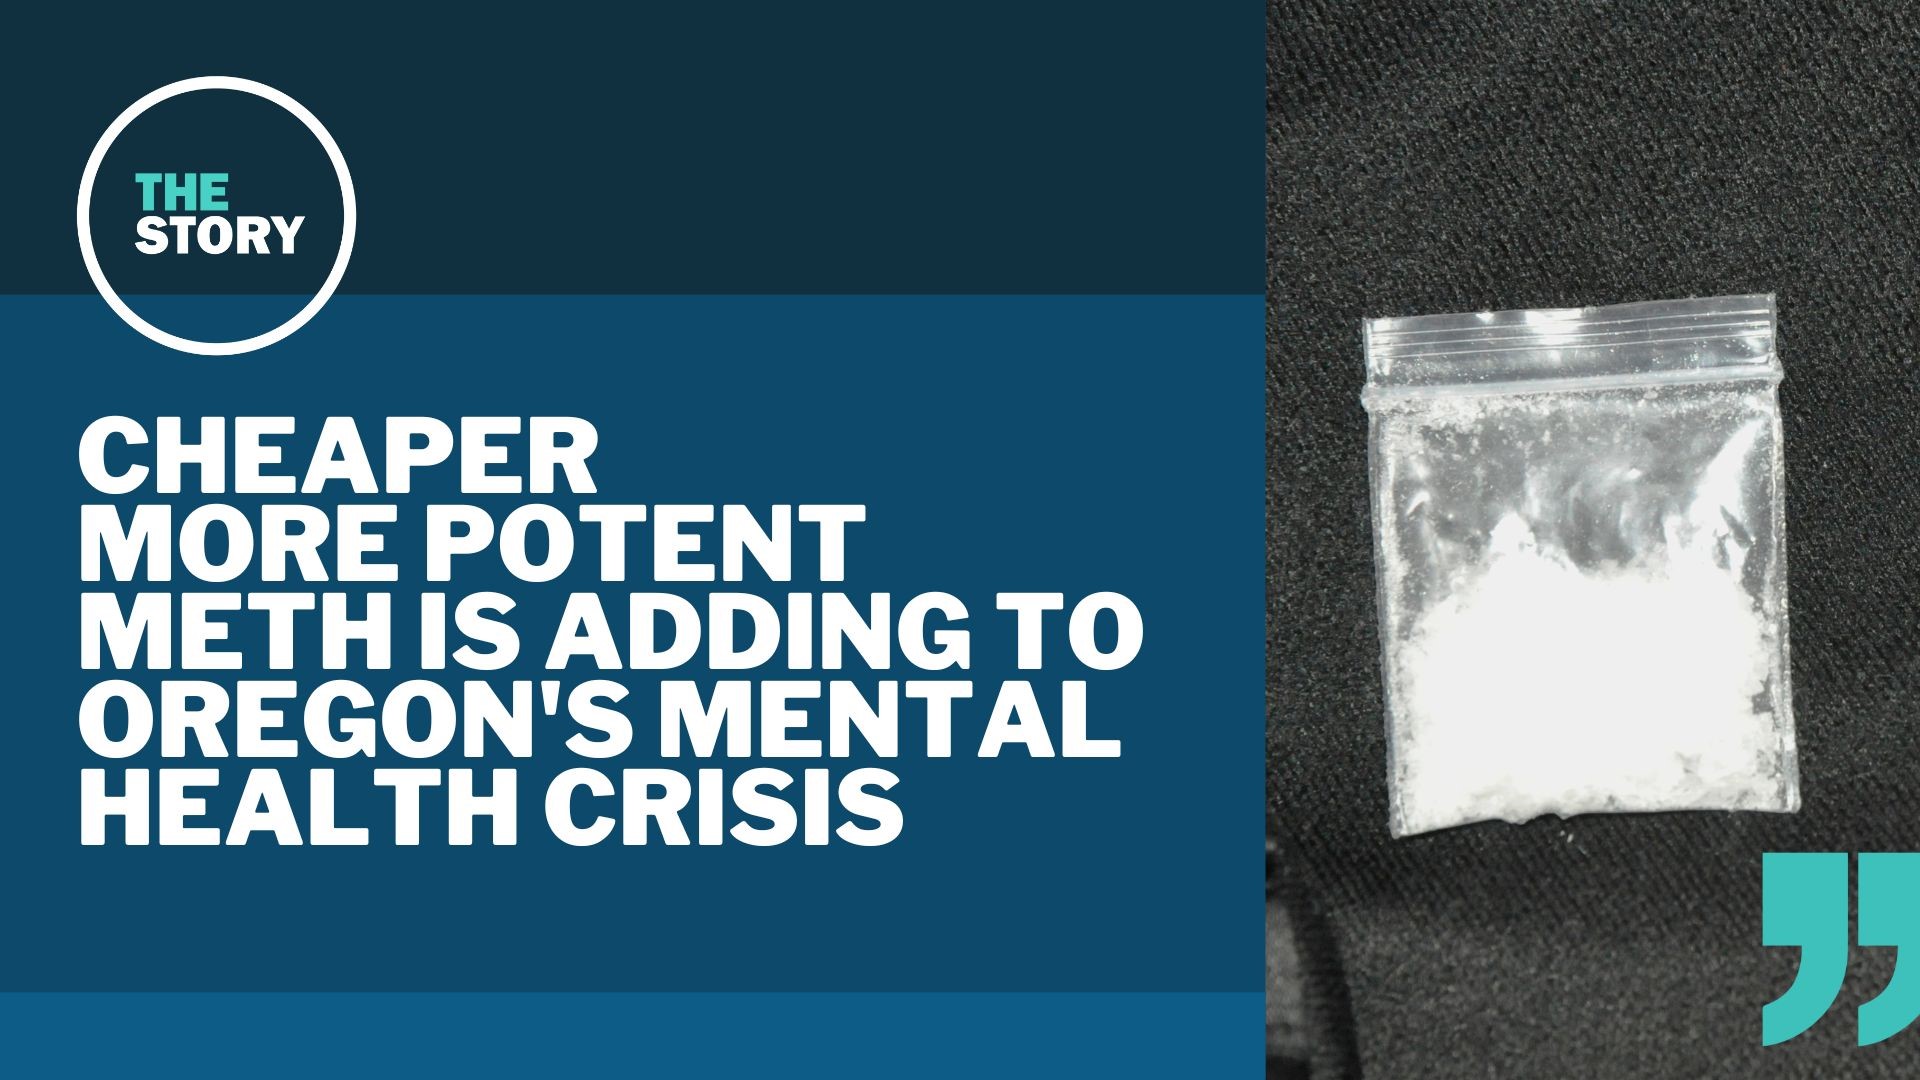 A cheaper, more potent form of meth his dominated the market and, according to a new report, it's making Oregon's mental health crisis even worse.